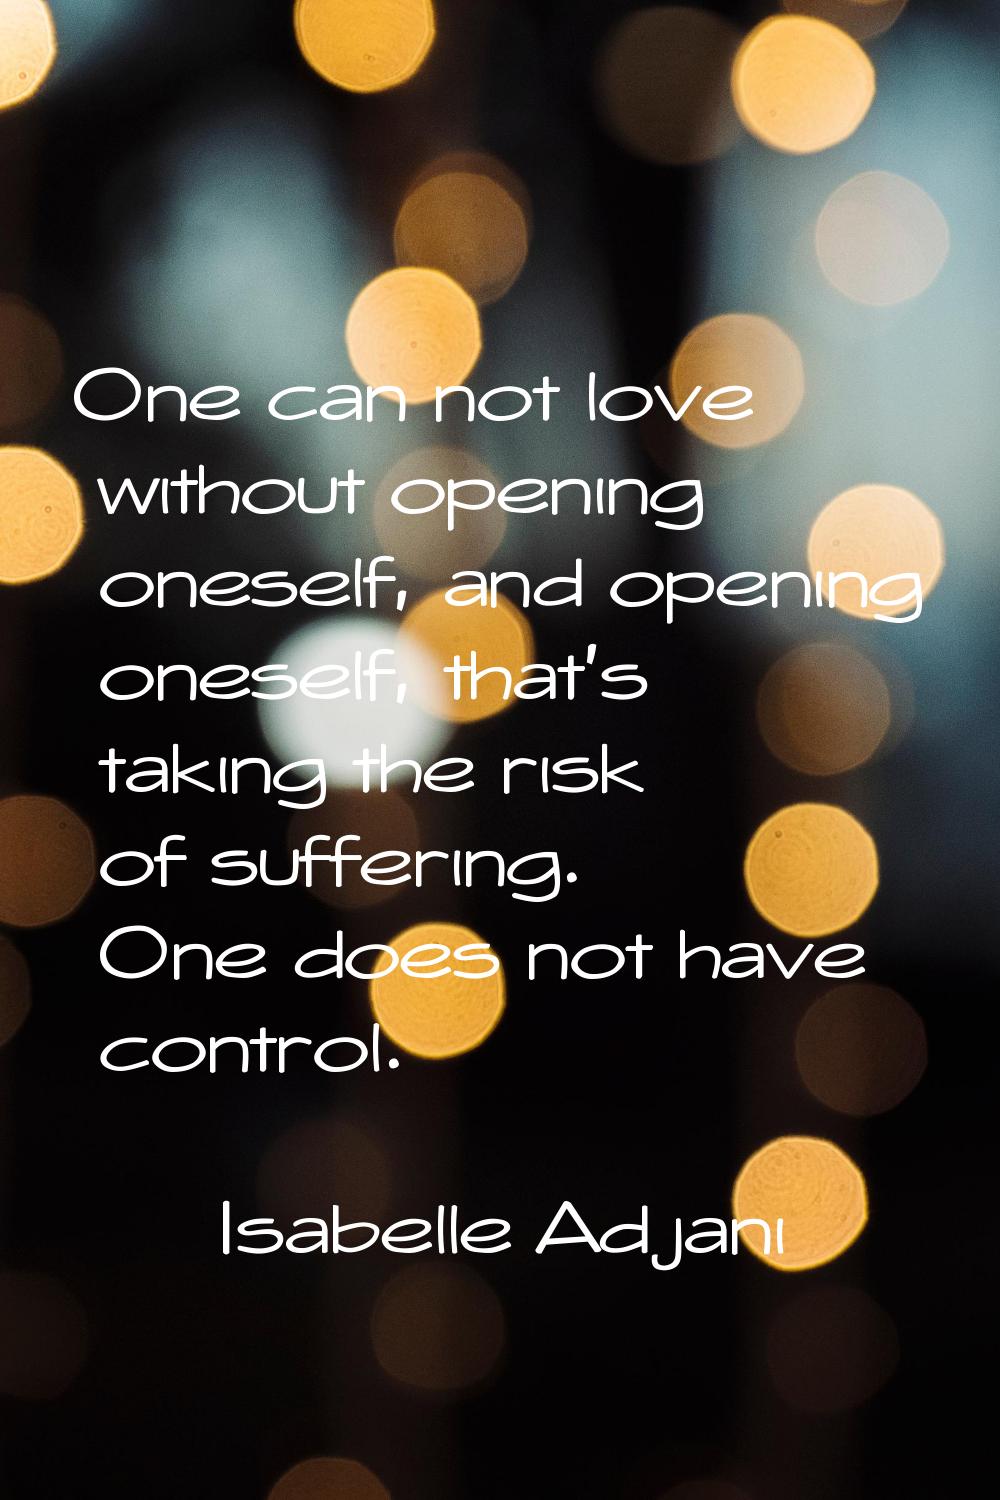 One can not love without opening oneself, and opening oneself, that's taking the risk of suffering.